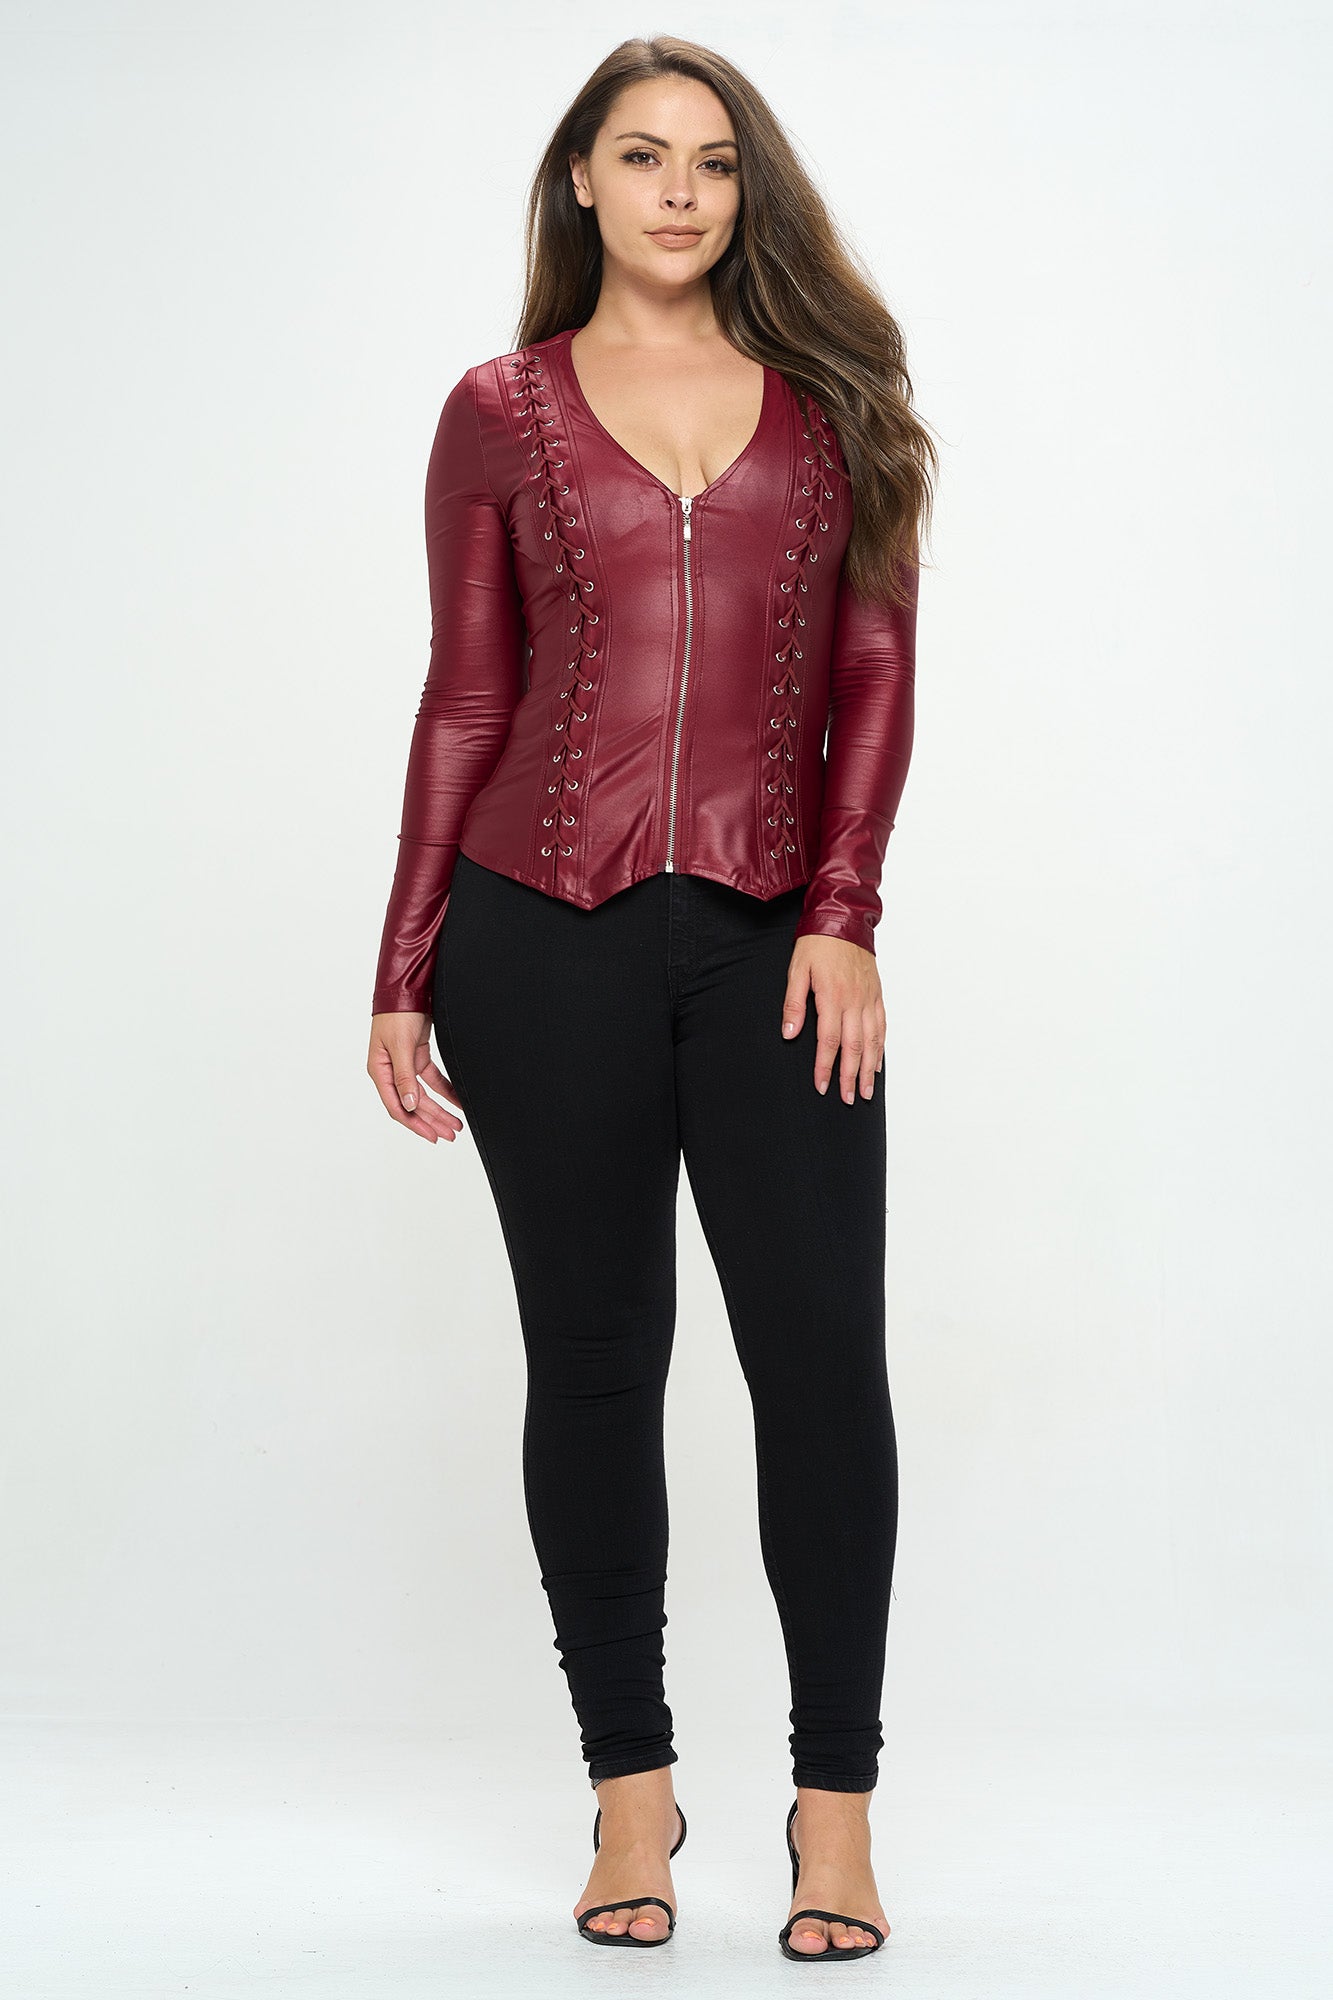 LACE-UP DETAIL ZIP UP LONG SLEEVE JACKET -PLUS